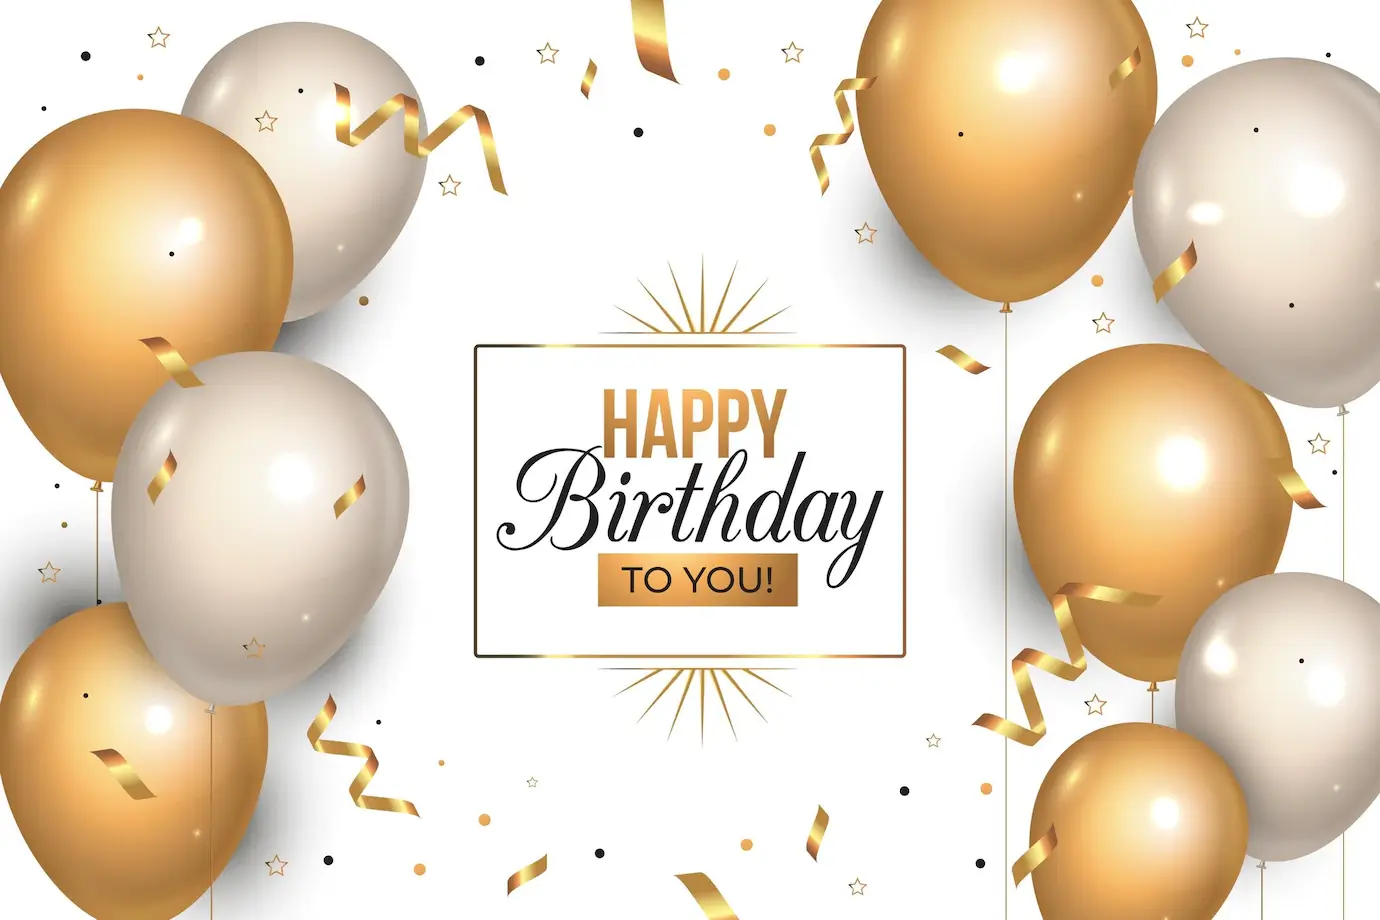 Happy 40th Birthday Wishes: Wishes Ideas for 40th Birthday